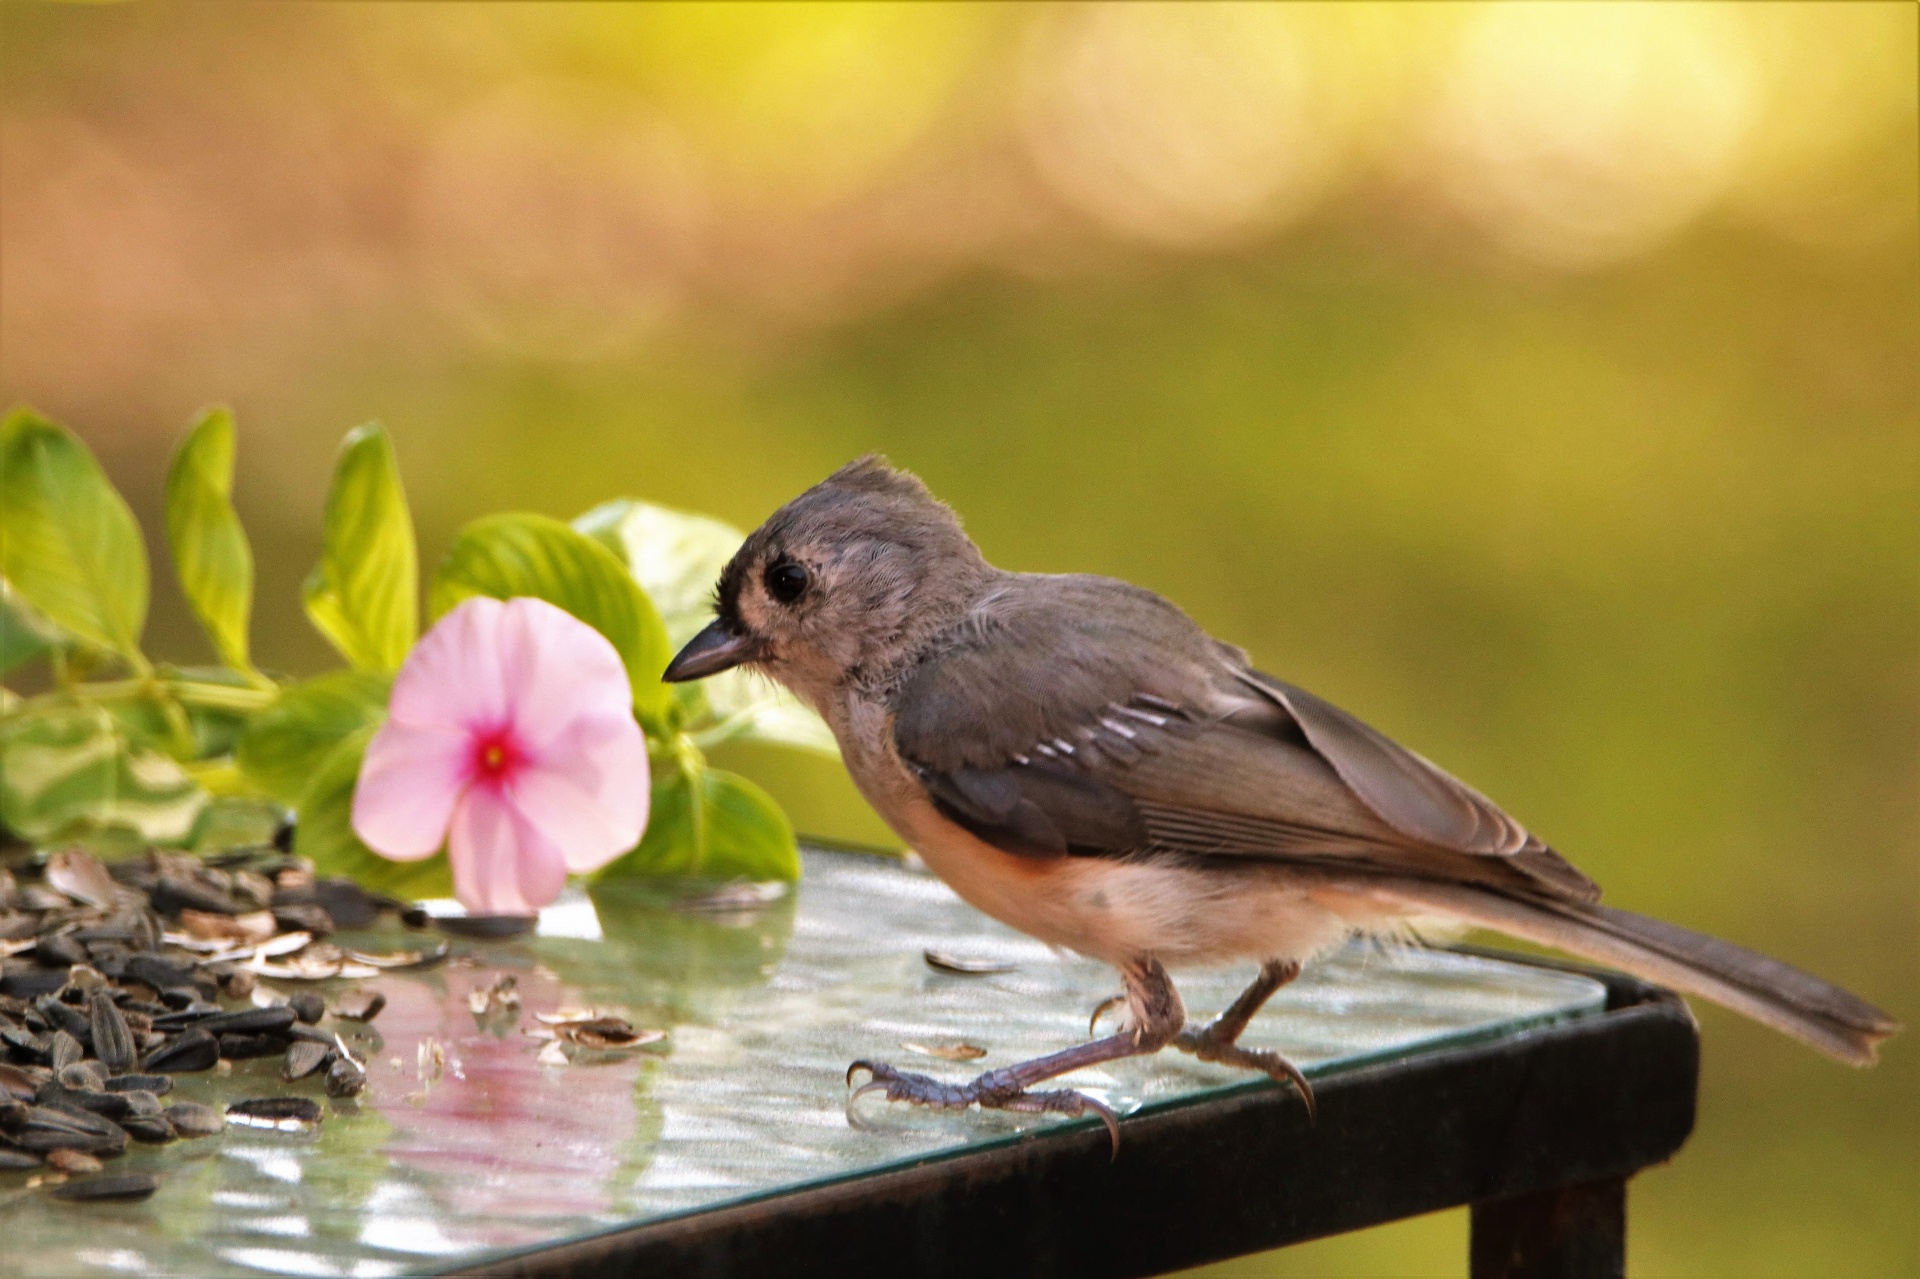 Close-up of a young tufted titmouse bird standing on a table with sunflower seeds and a pink flower, on a green bokeh background.